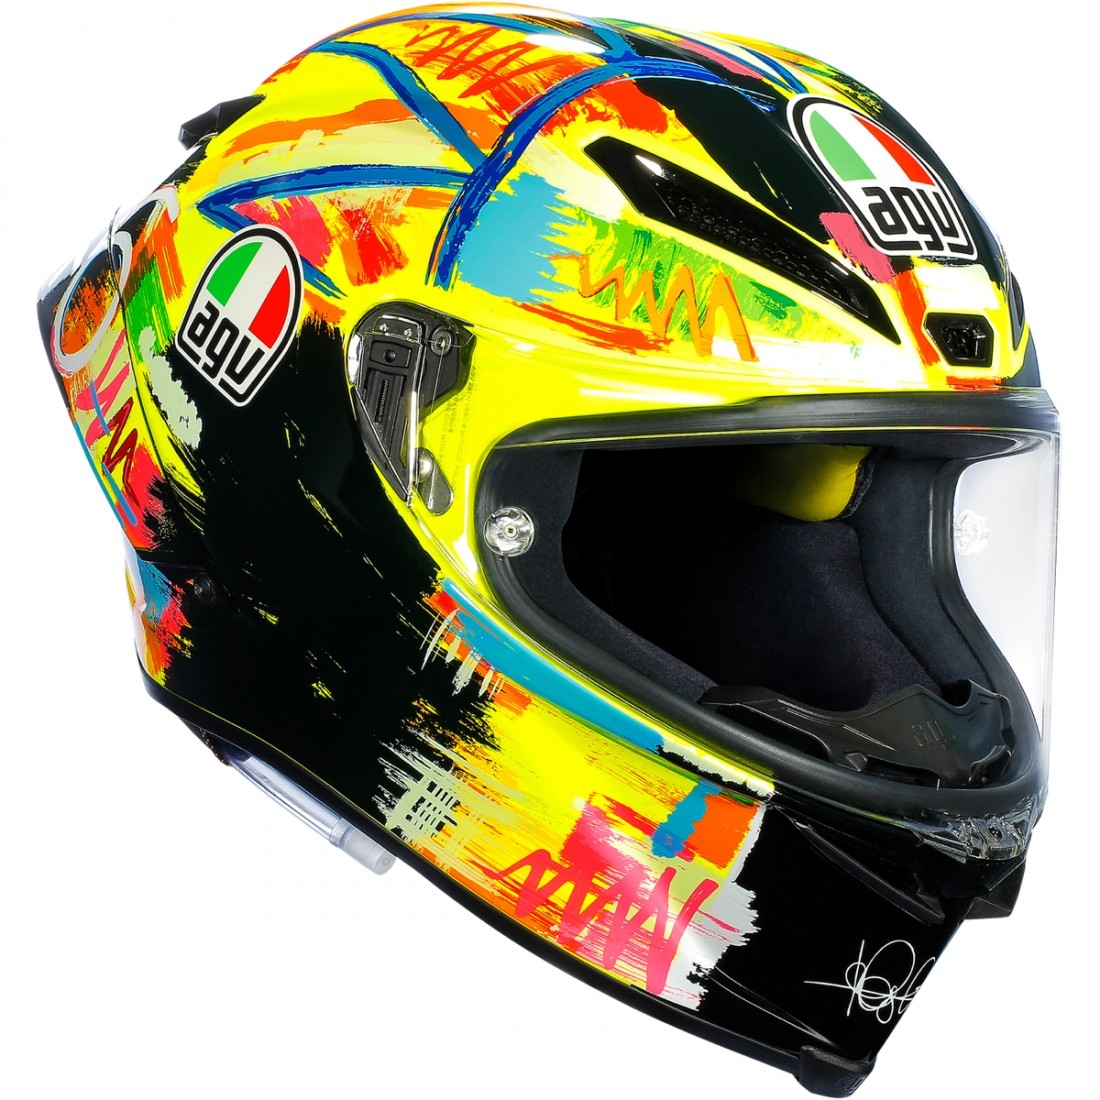 AGV Pista GP R Rossi Winter Test 2019 Limited Edition